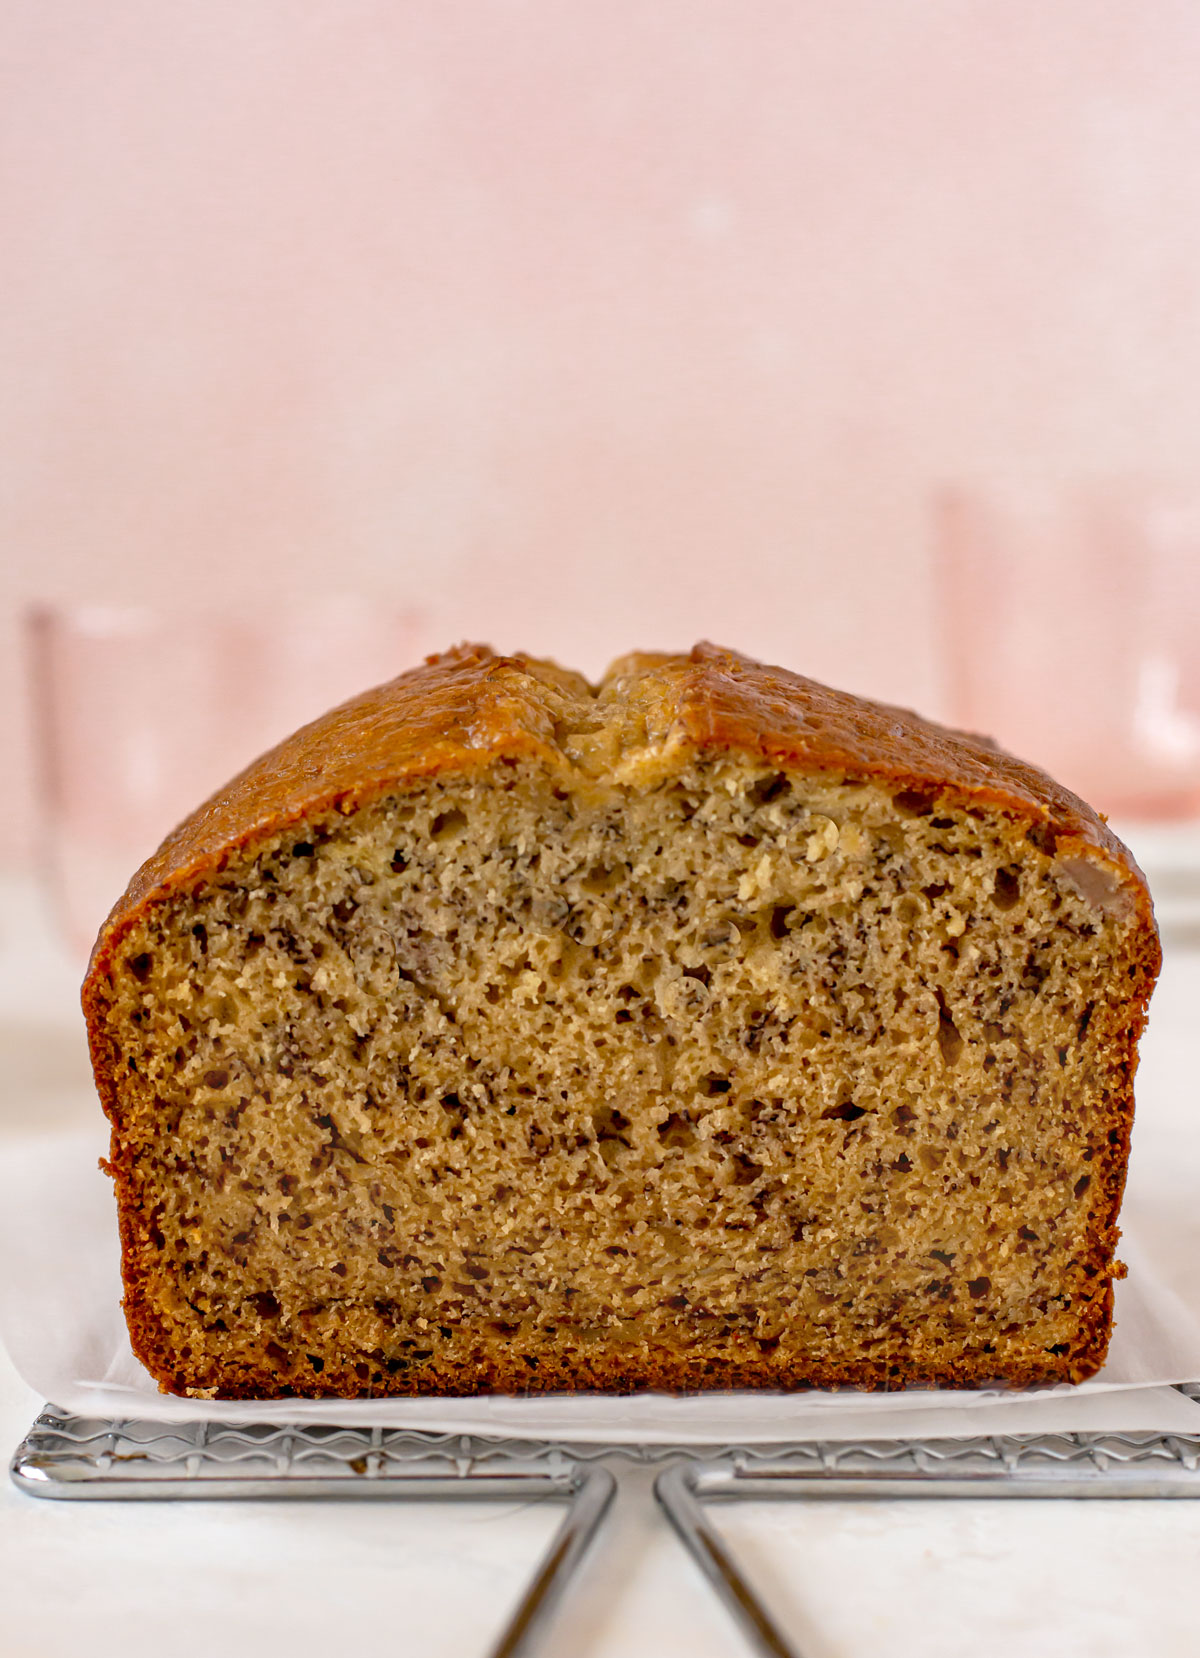 Close up shot of a loaf of banana bread with a slice cut off the front to expose the crumb on the inside.